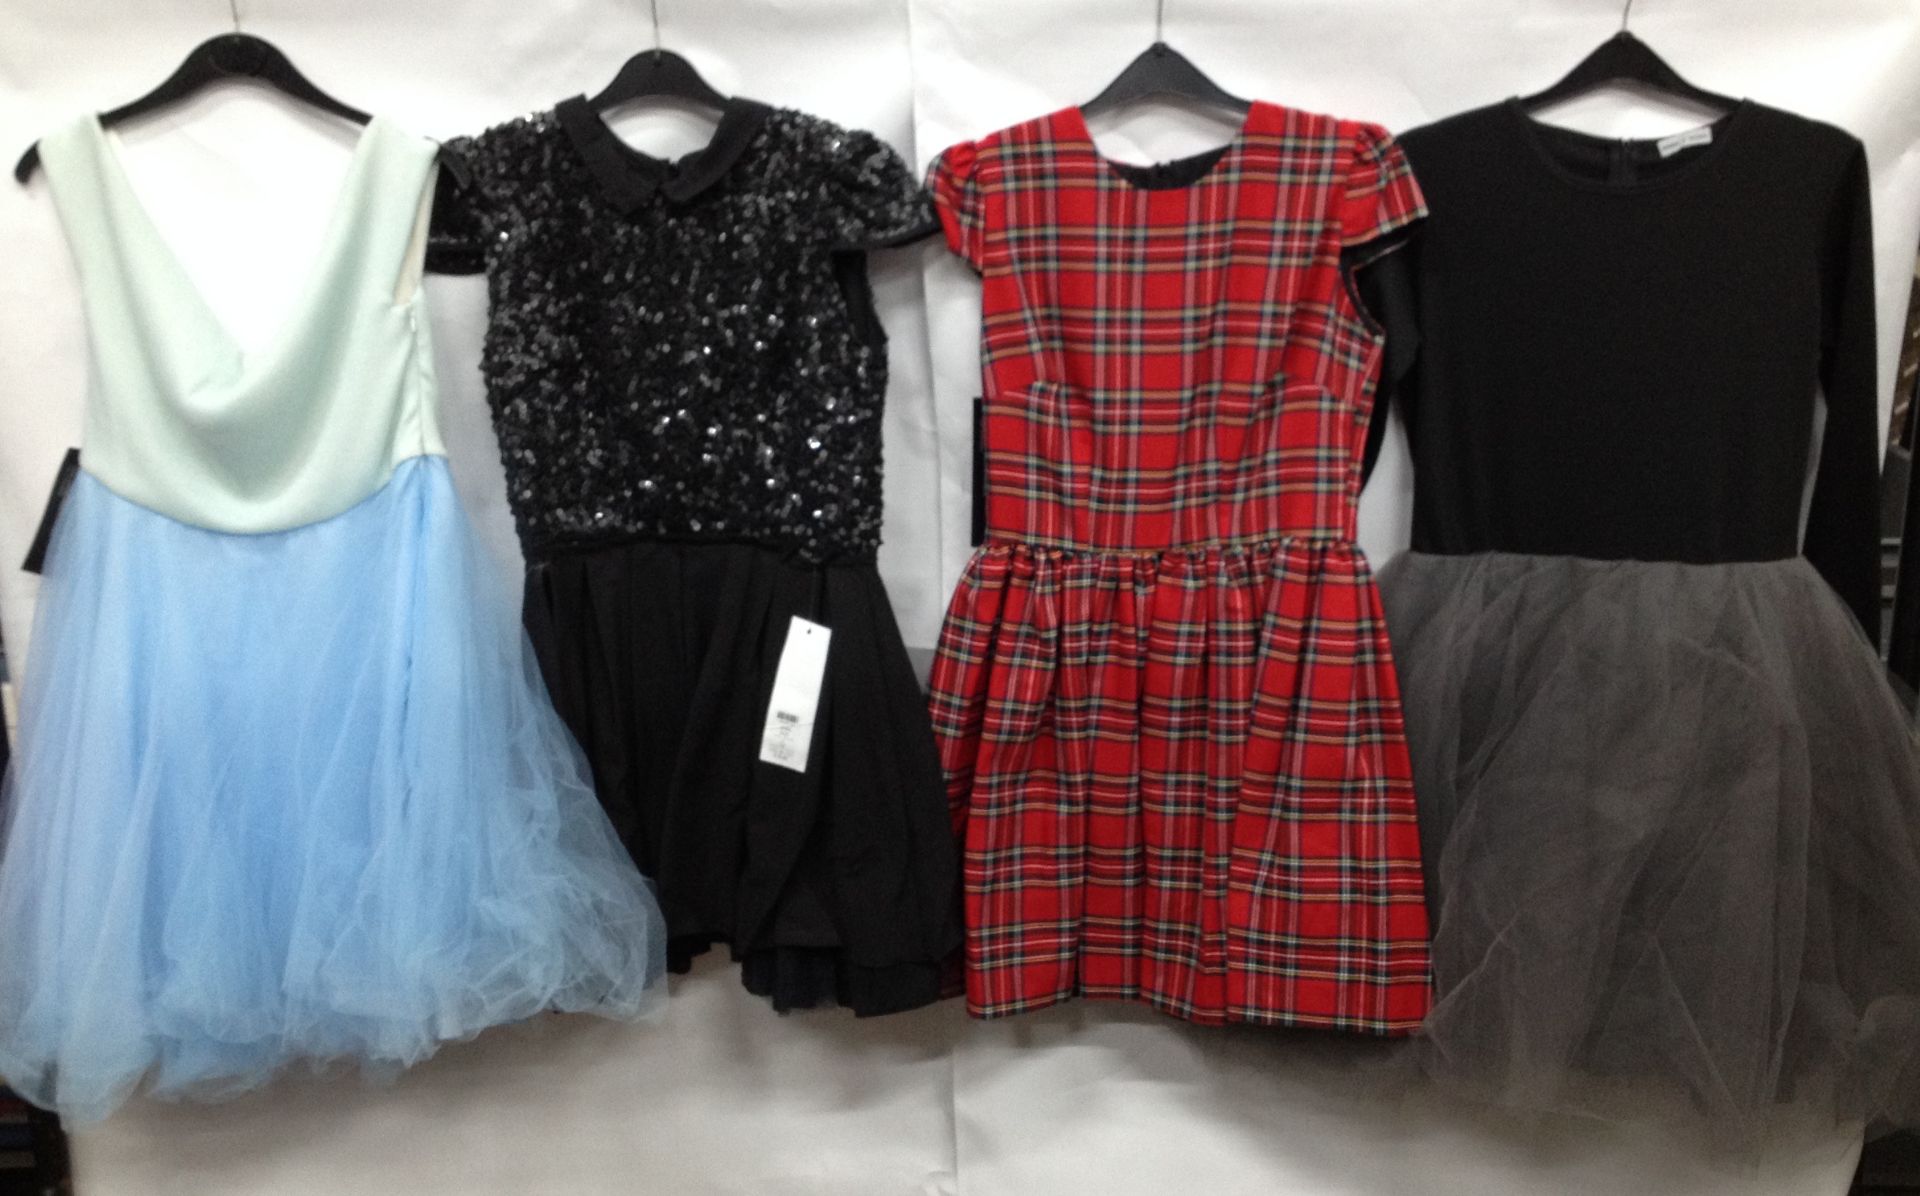 25 x Mixed Style Dresses